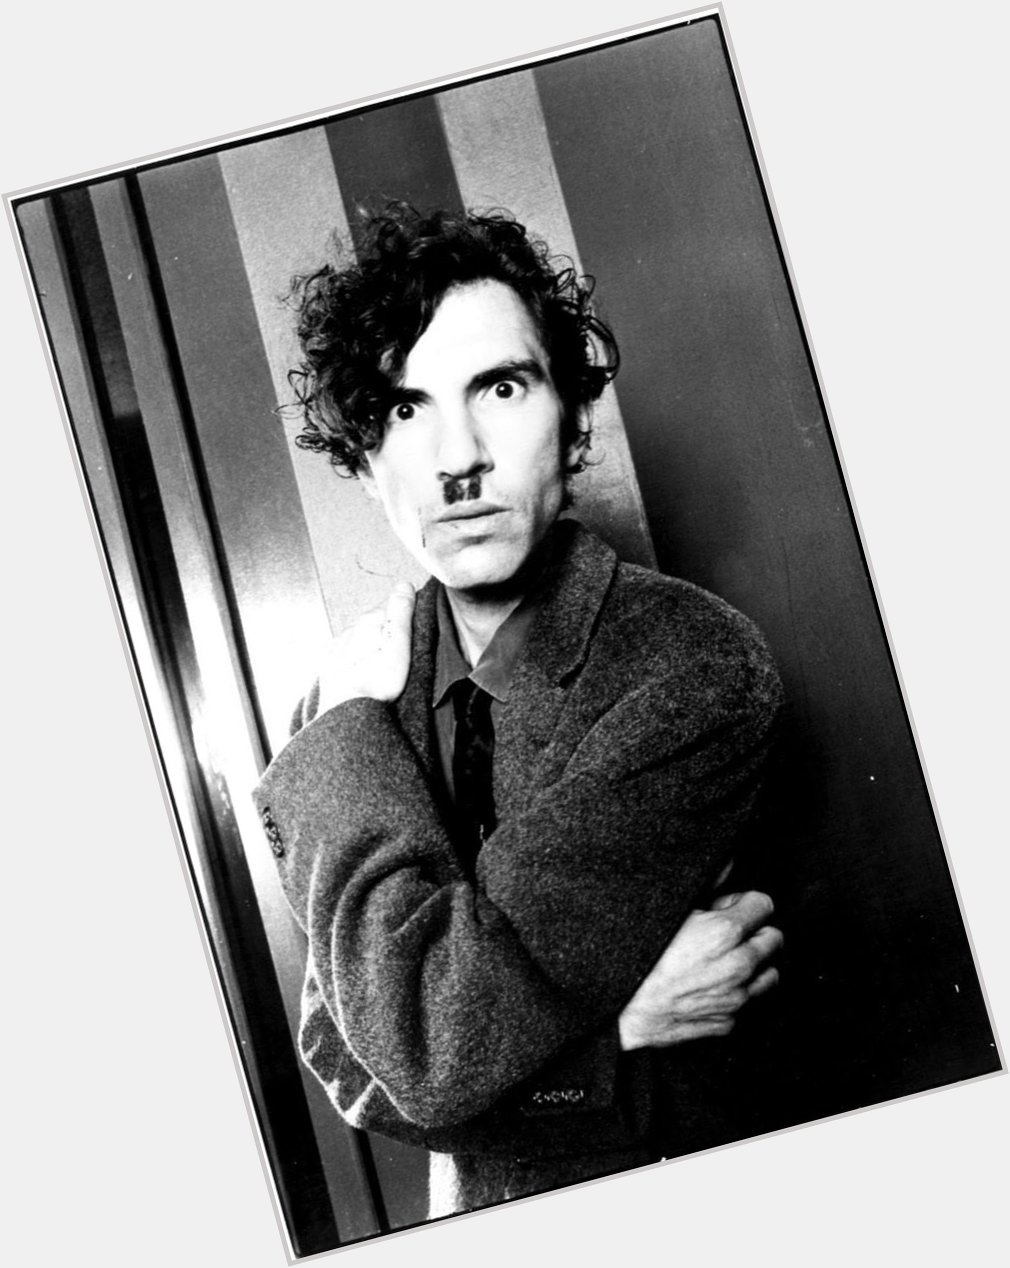 I d like to take time out of my birthday to say happy birthday to Ron Mael. I fully expect the same from him. 